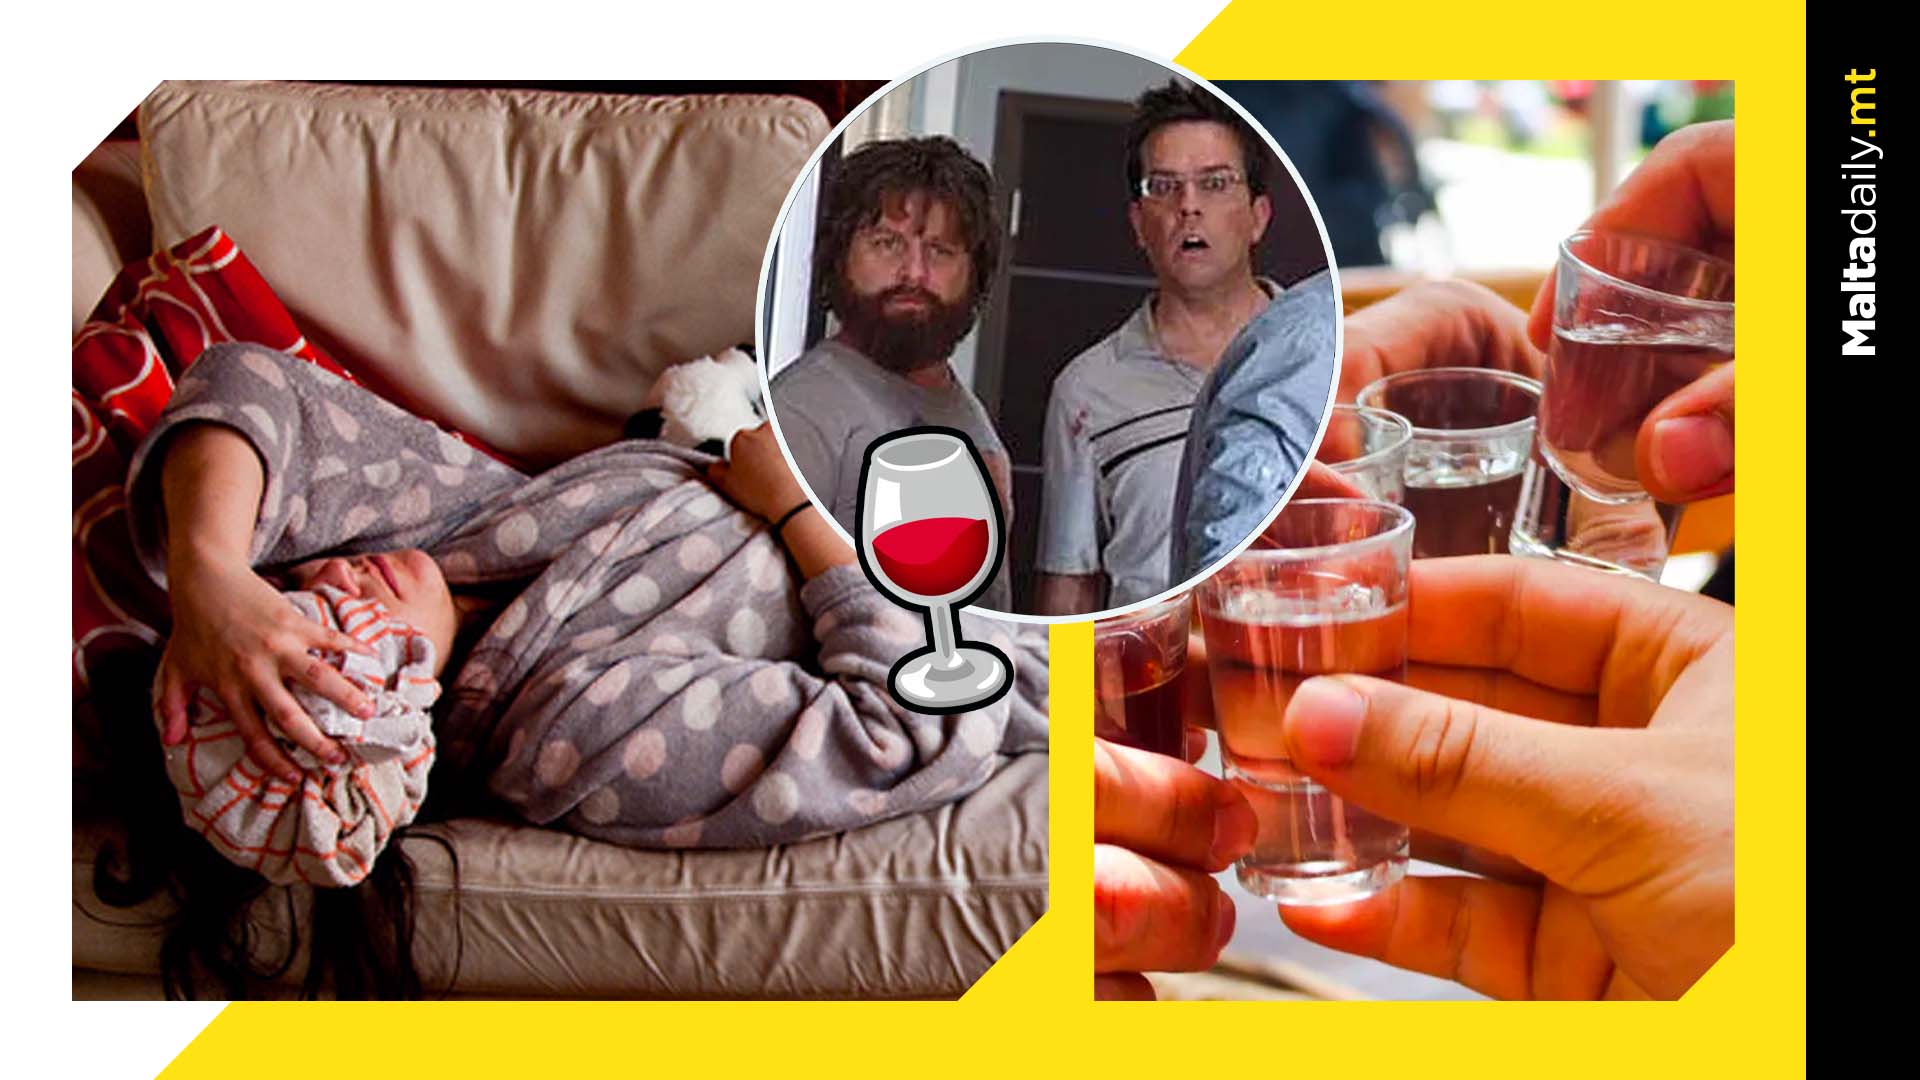 Scientists discover new drug which could end hangover effects